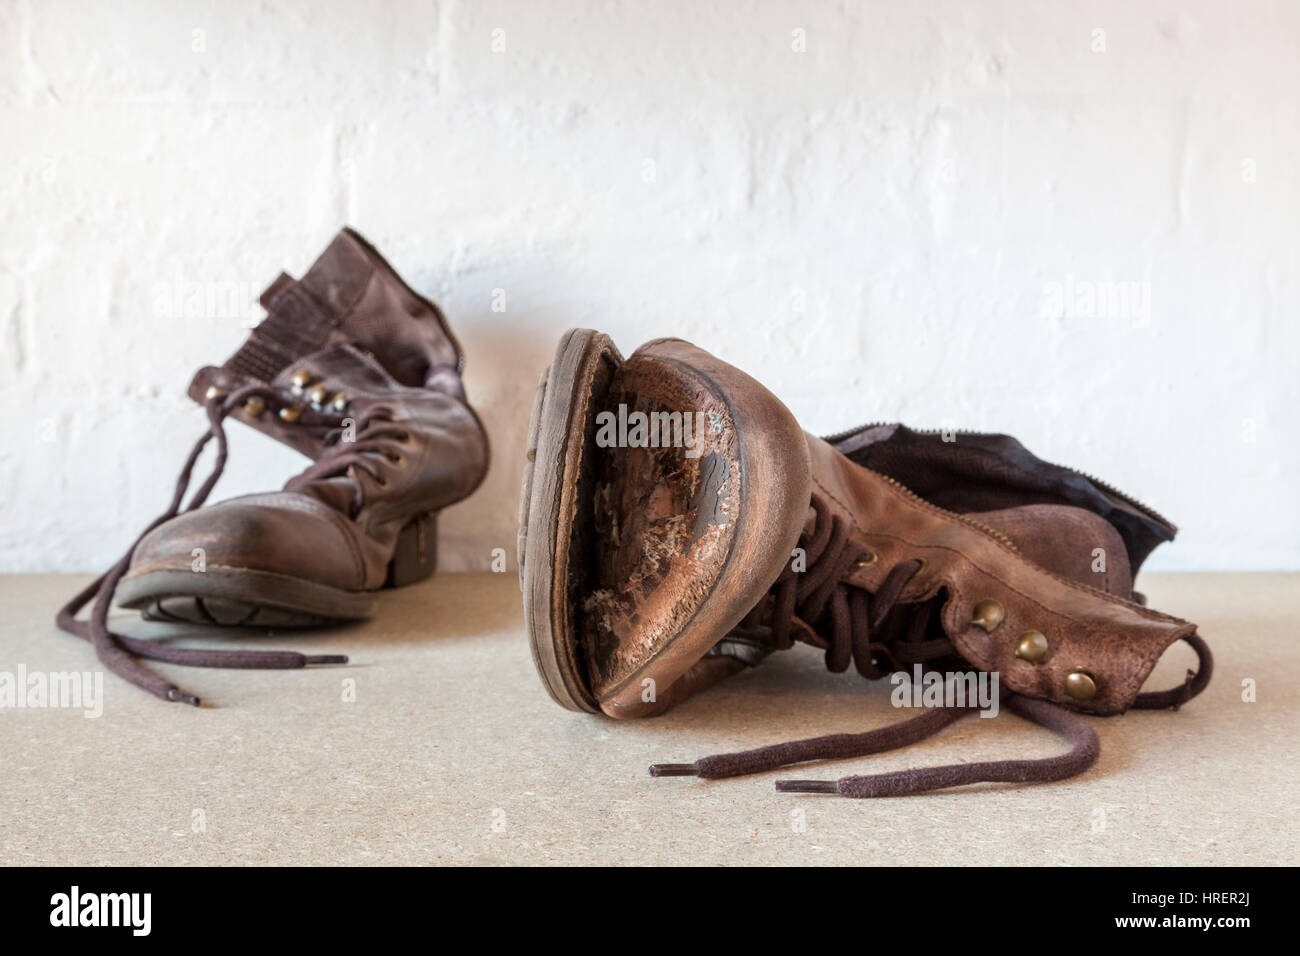 Worn out old boots, one boot with the sole coming off and beyond repair  Stock Photo - Alamy